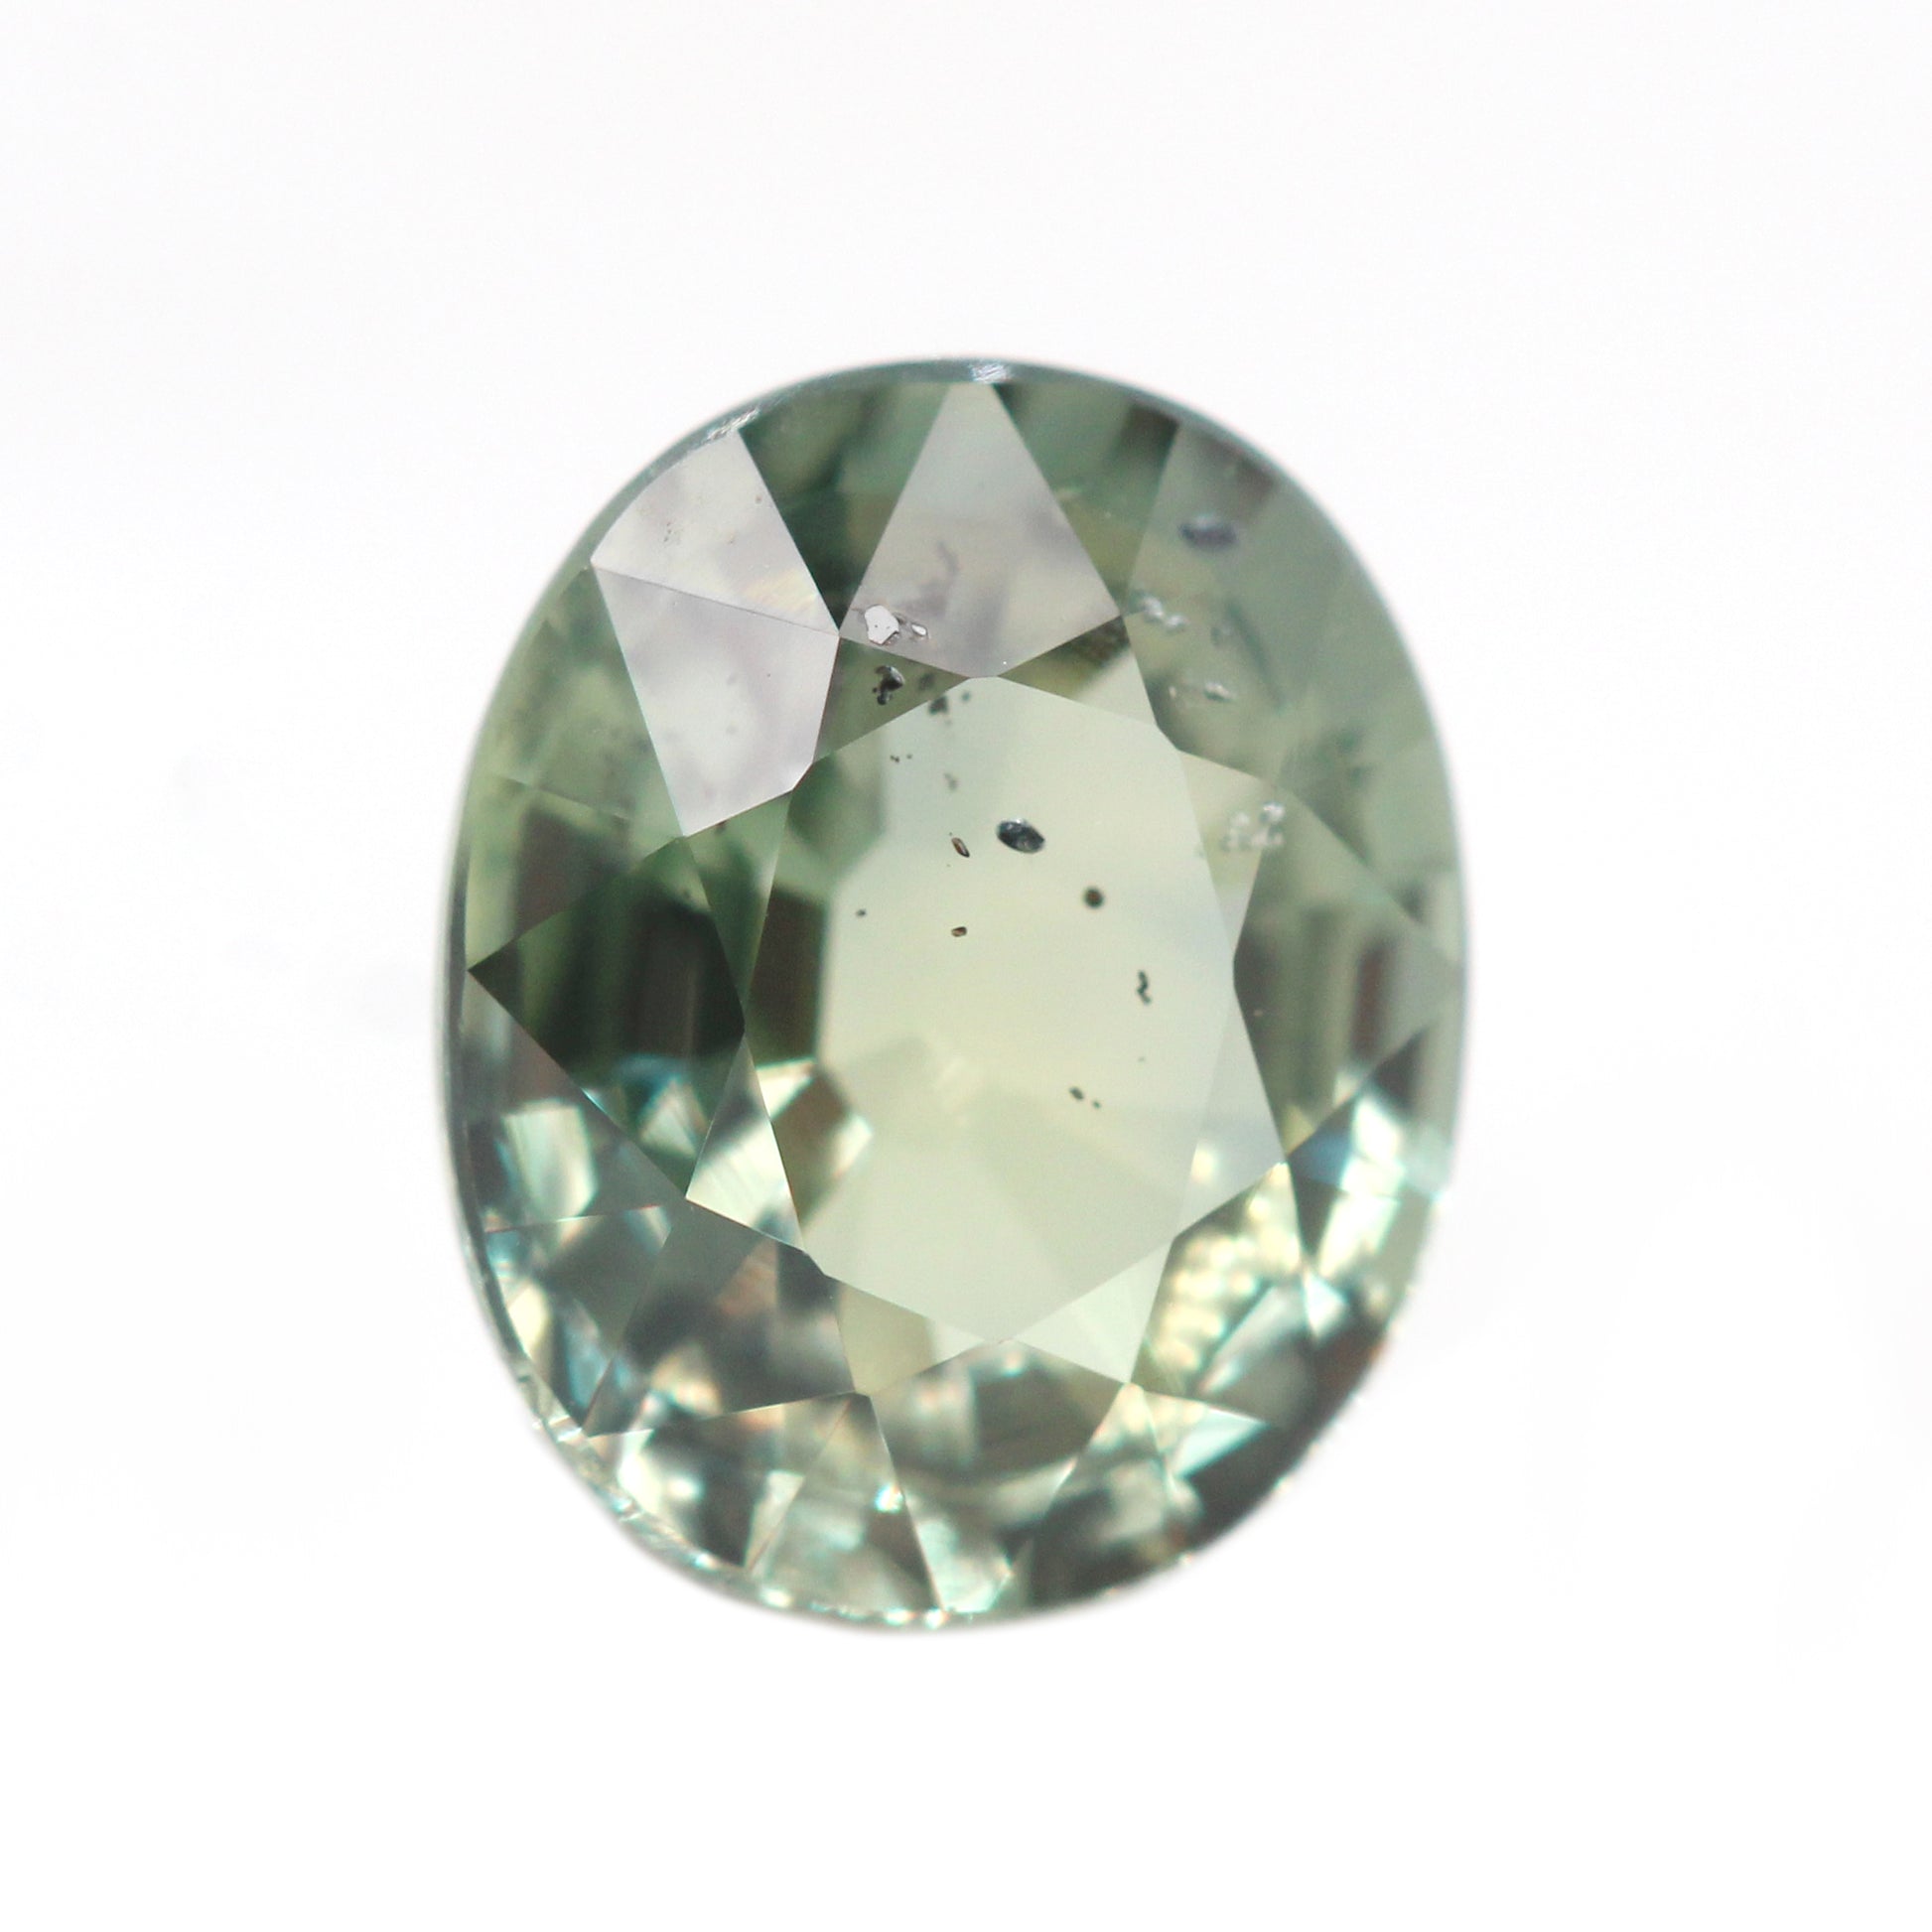 1.44 Carat Light Earthy Green Oval Sapphire for Custom Work - Inventory Code GOS144 - Midwinter Co. Alternative Bridal Rings and Modern Fine Jewelry